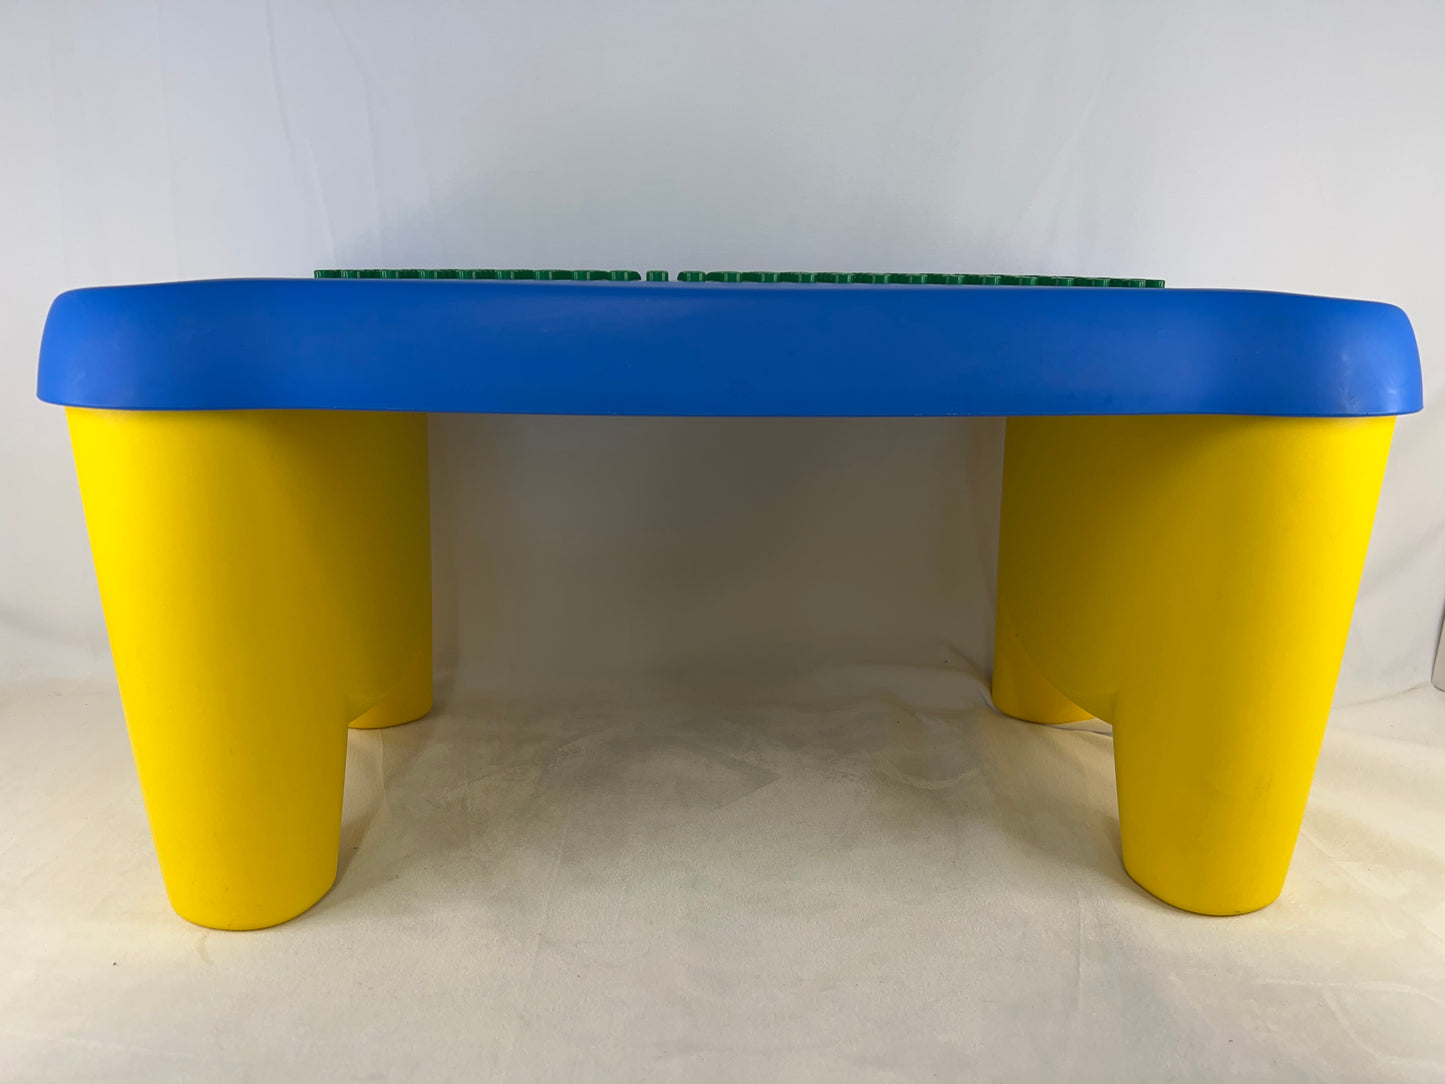 Lego Vintage Duplo Lap Table Fits Lego Duplo or Primo Dimensions 9.5 x 14.2 x 25.8 inches Excellent Condition